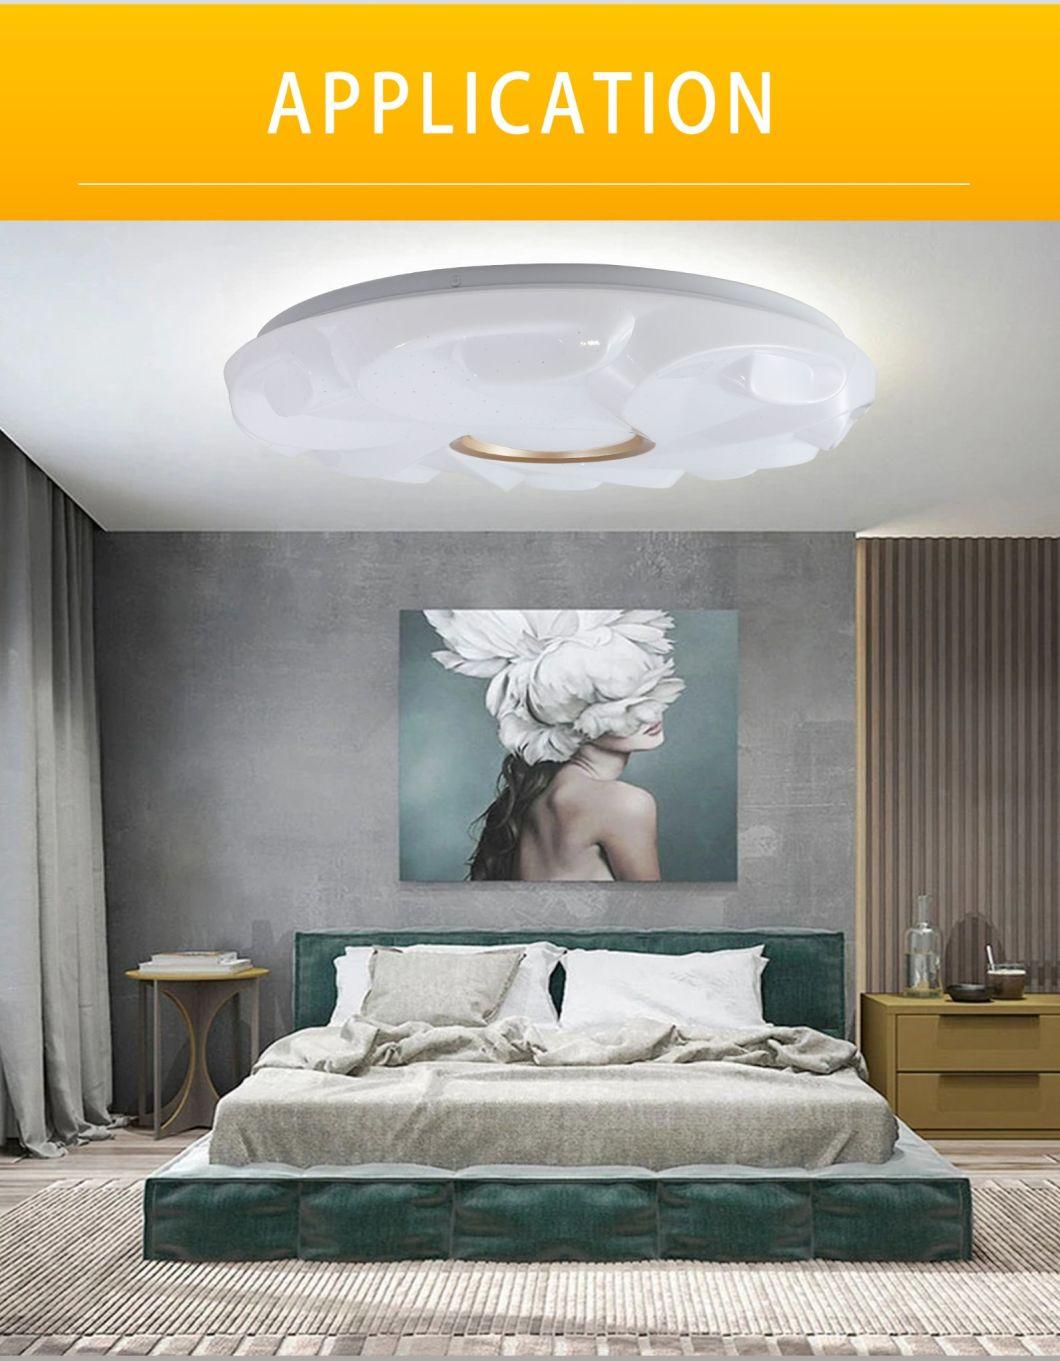 20W 220vsurface Luxuryhouse Chandelierled Shop Commercial Ceiling Light